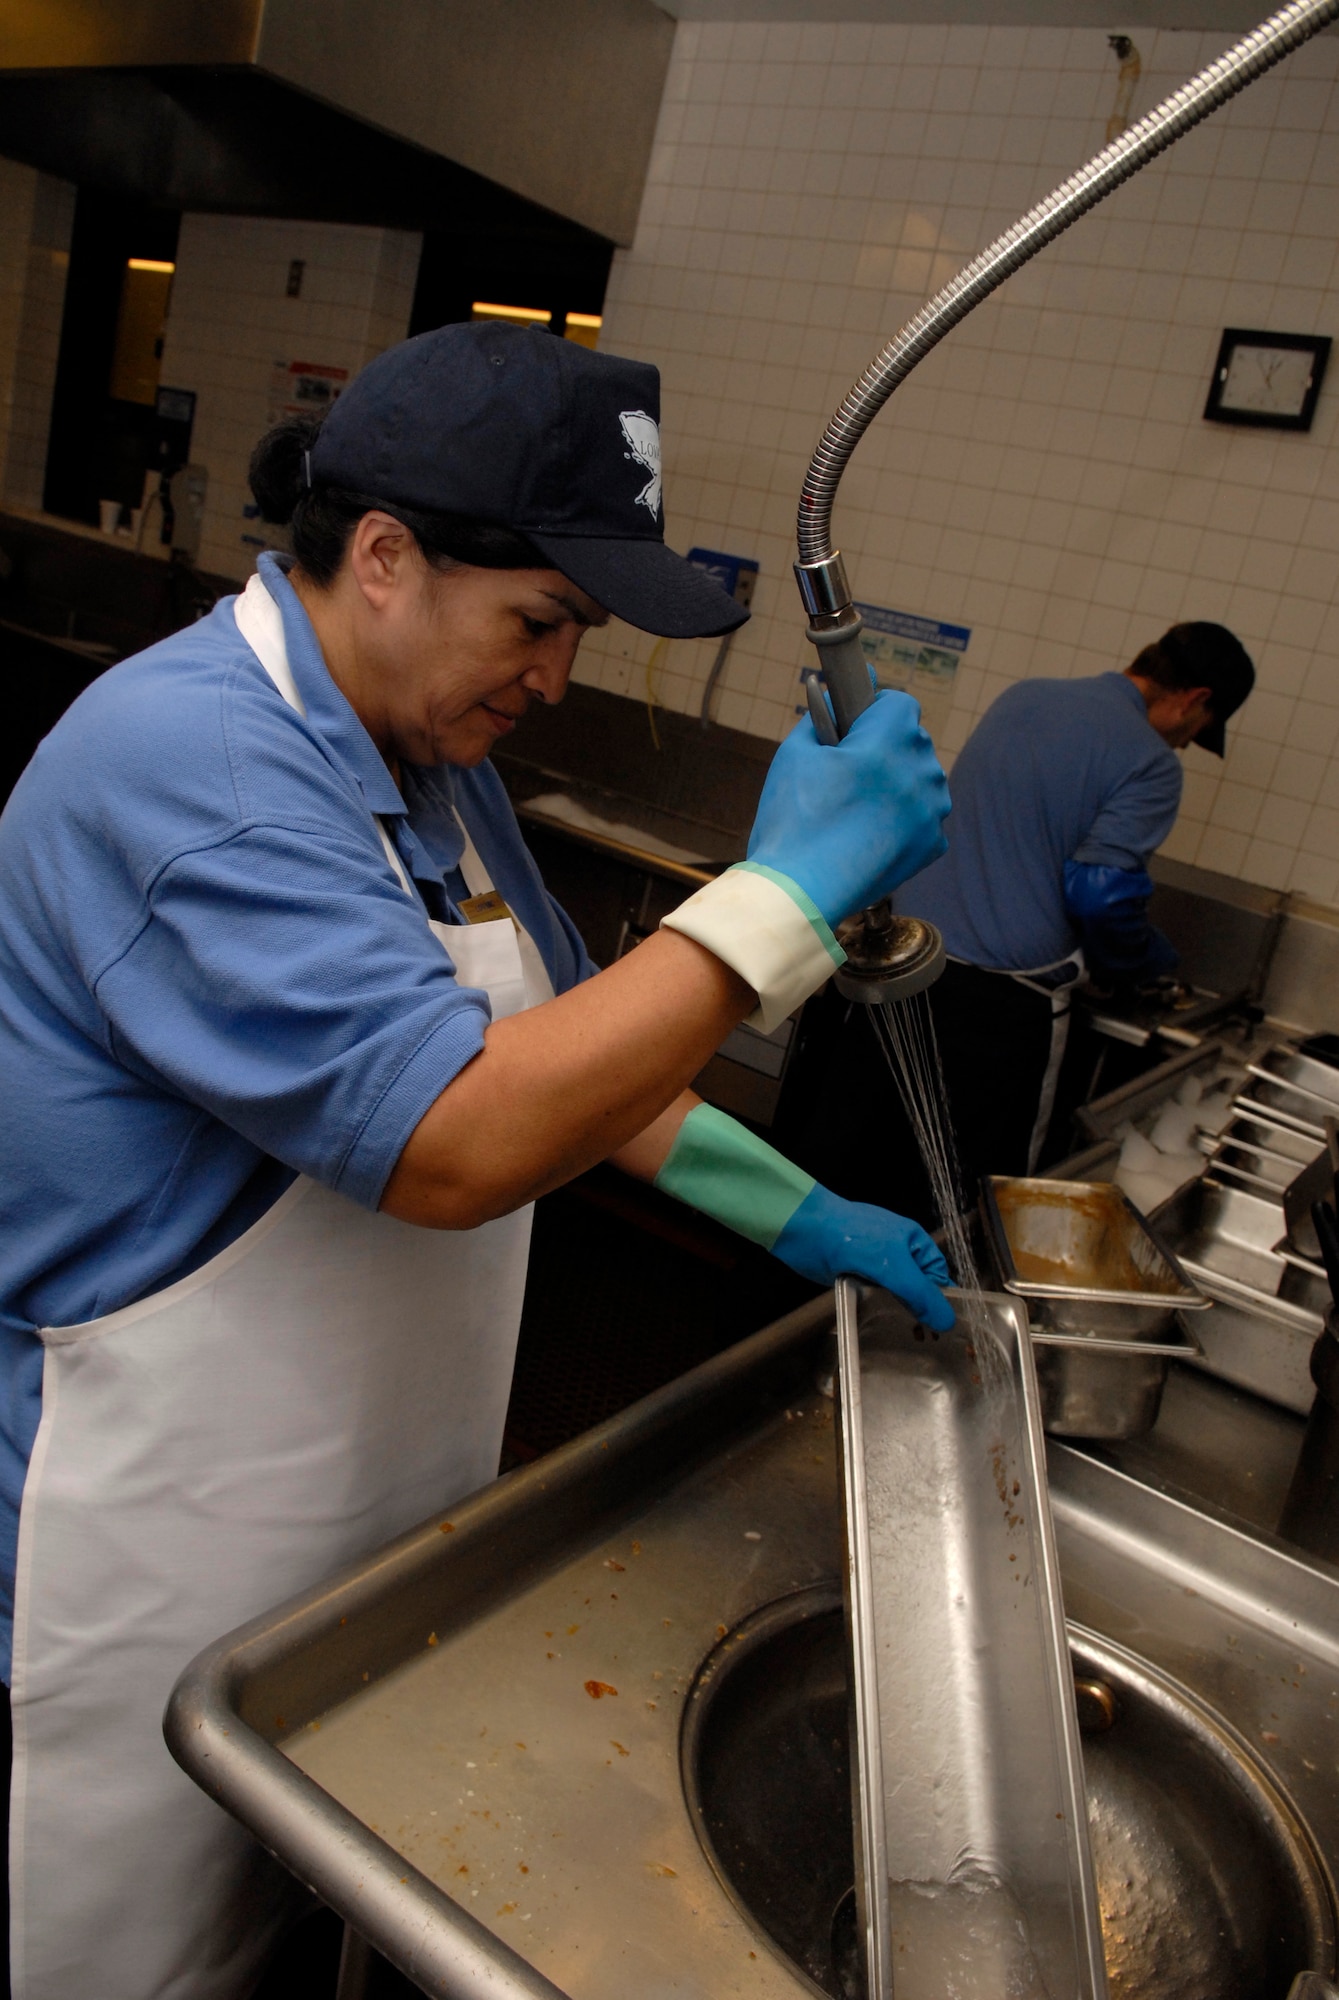 VANDENBERG AIR FORCE BASE, Calif. -- MaryAnn Canas, a food service worker at Breakers Dining Facility, cleans pots and pans March 18. The facility is responsible for providing the nutrition Airmen need to perform their duties by being both healthy and affordable. (U.S. Air Force photo/Senior Airman Christian Thomas)
